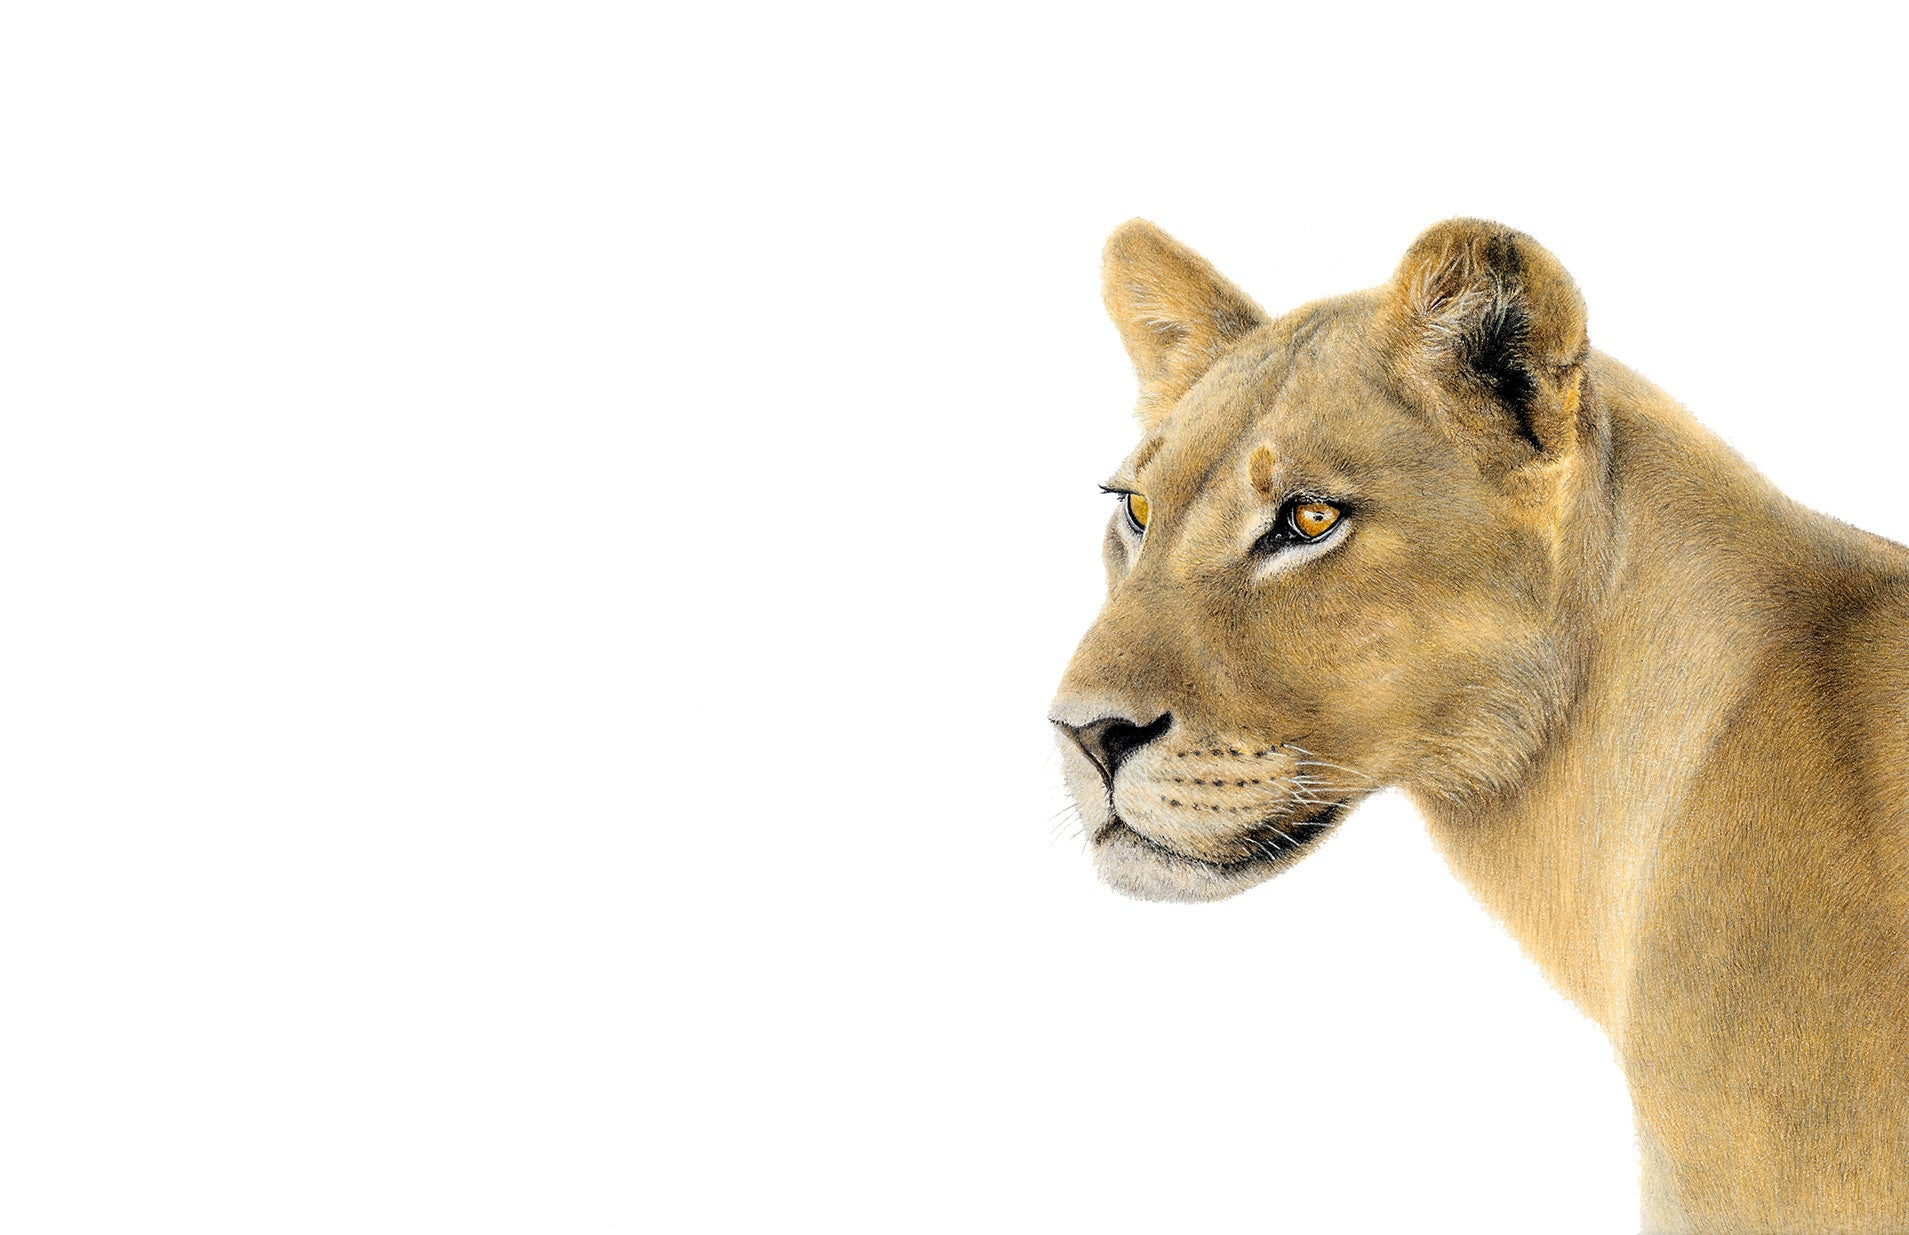 Lioness portrait pencil drawing by Matthew Bell